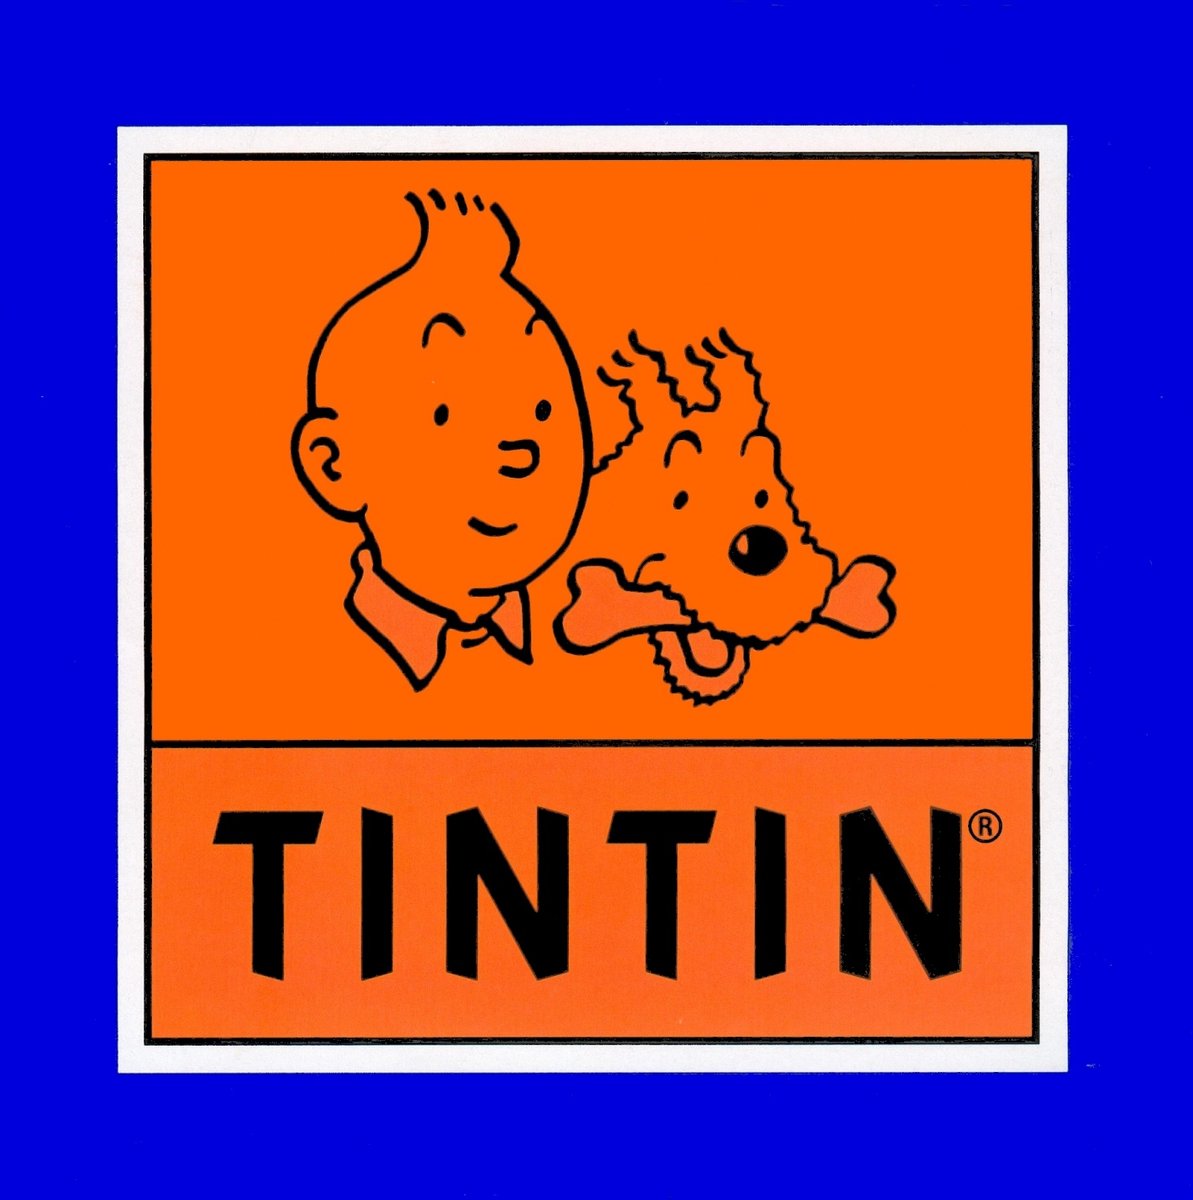 Tintin Poster The museum of the imagination. Official Tintin edition. 40x60cm -  - Gadgetz Home